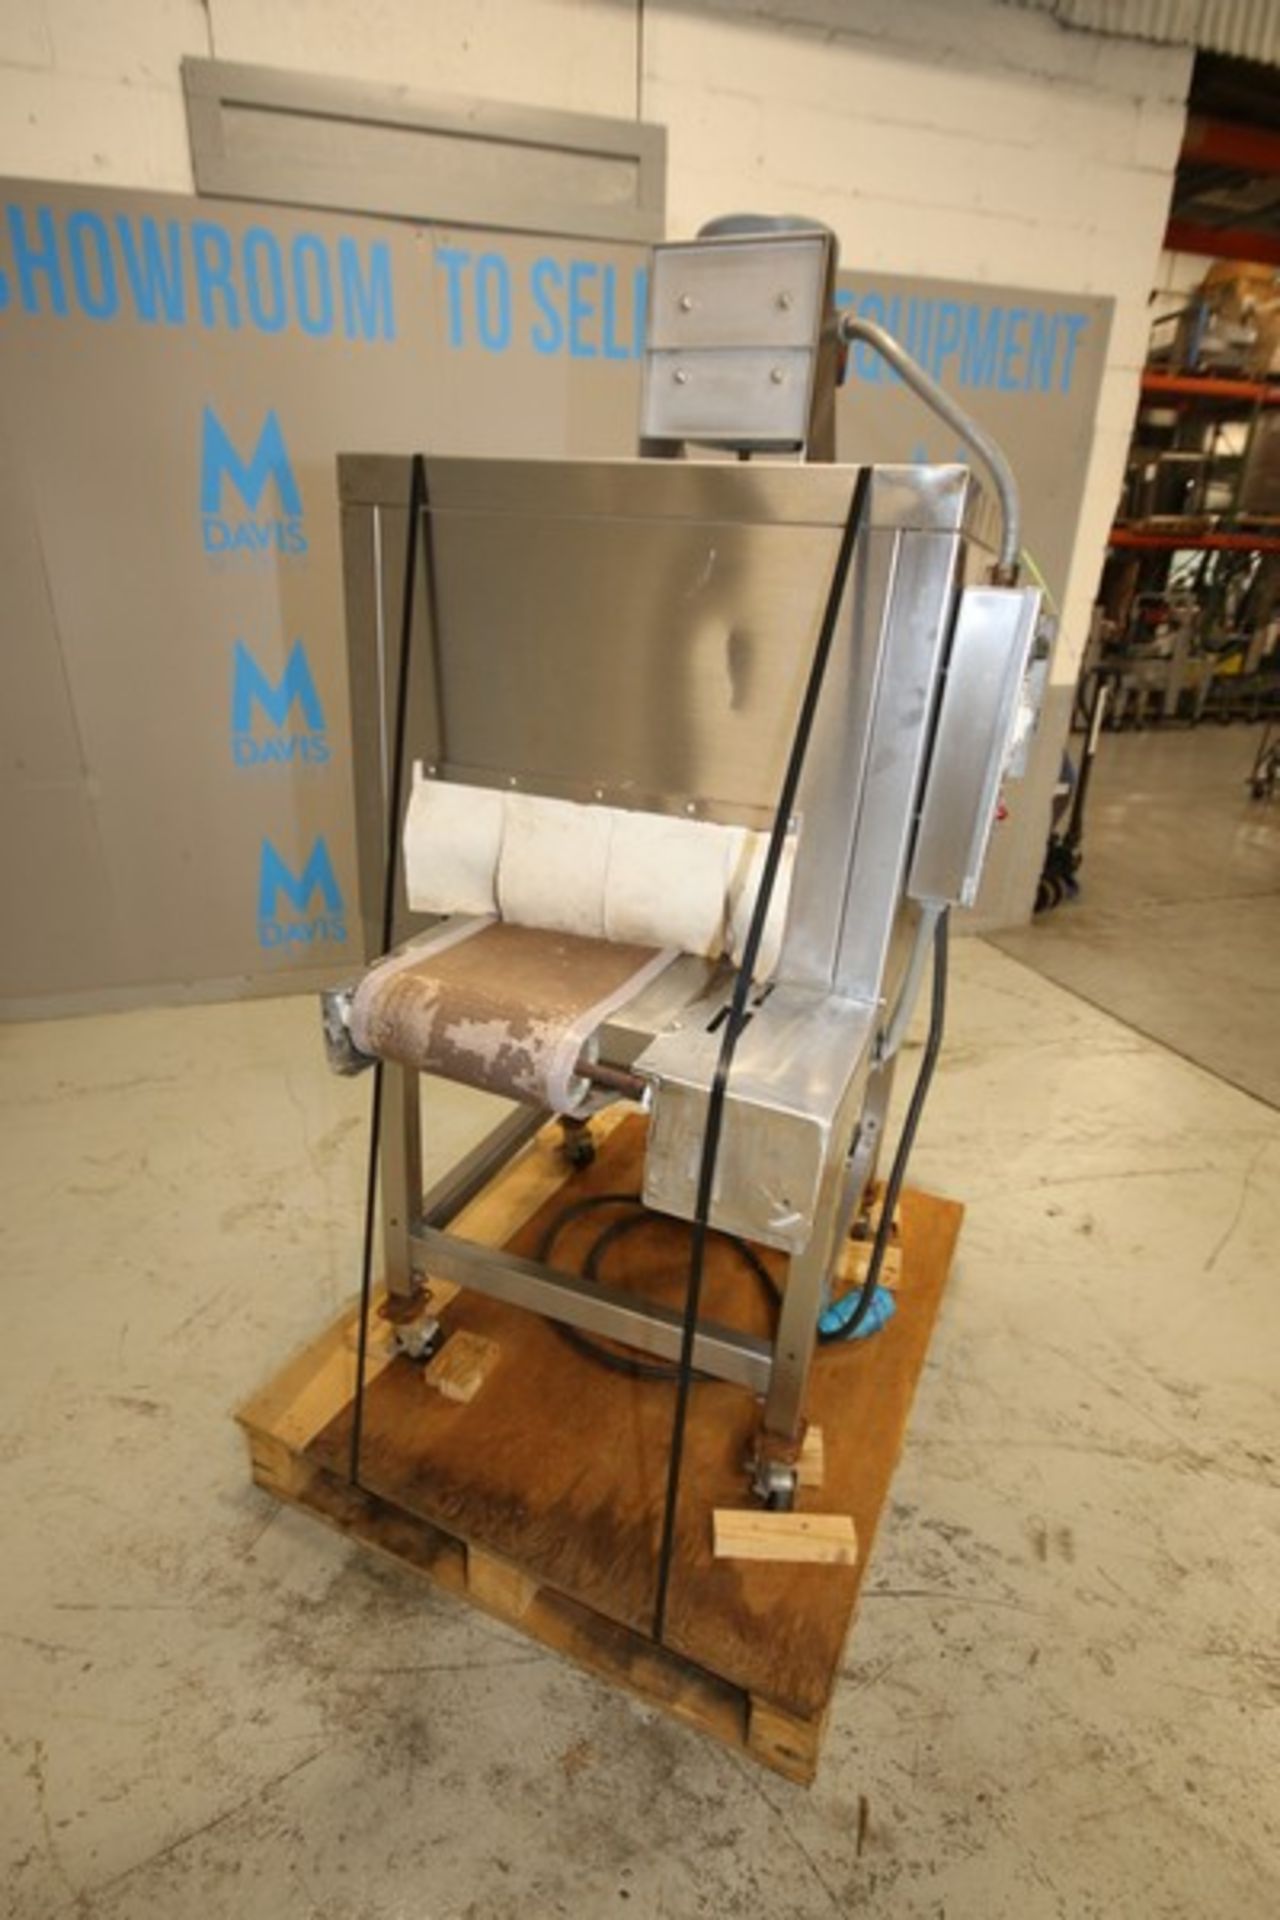 Shanklin 11" W x 6.5" H S/S Shrink Wrap Heat Tunnel, 115 V, Mounted on Casters (INV#88602)(Located @ - Bild 2 aus 8